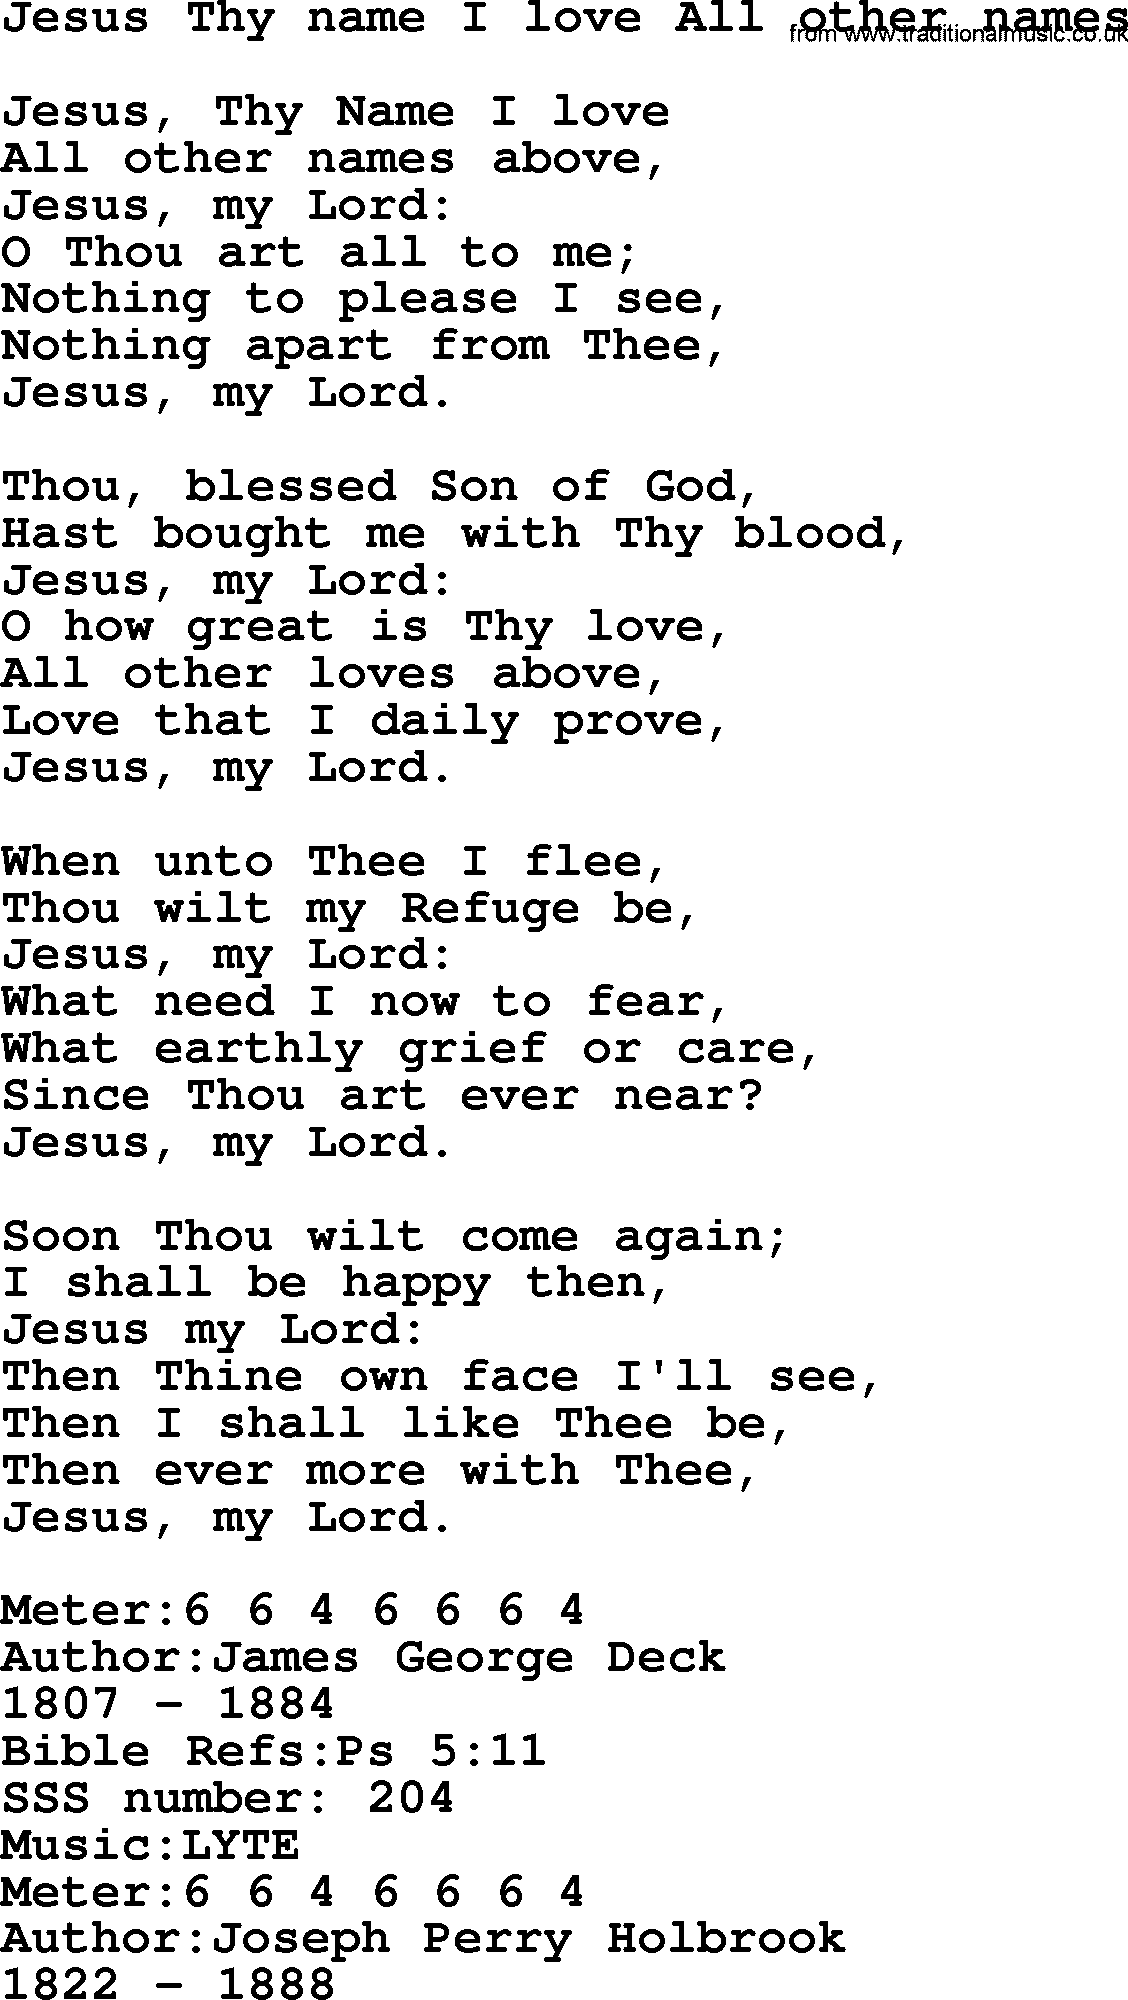 Sacred Songs and Solos complete, 1200 Hymns, title: Jesus Thy Name I Love All Other Names, lyrics and PDF